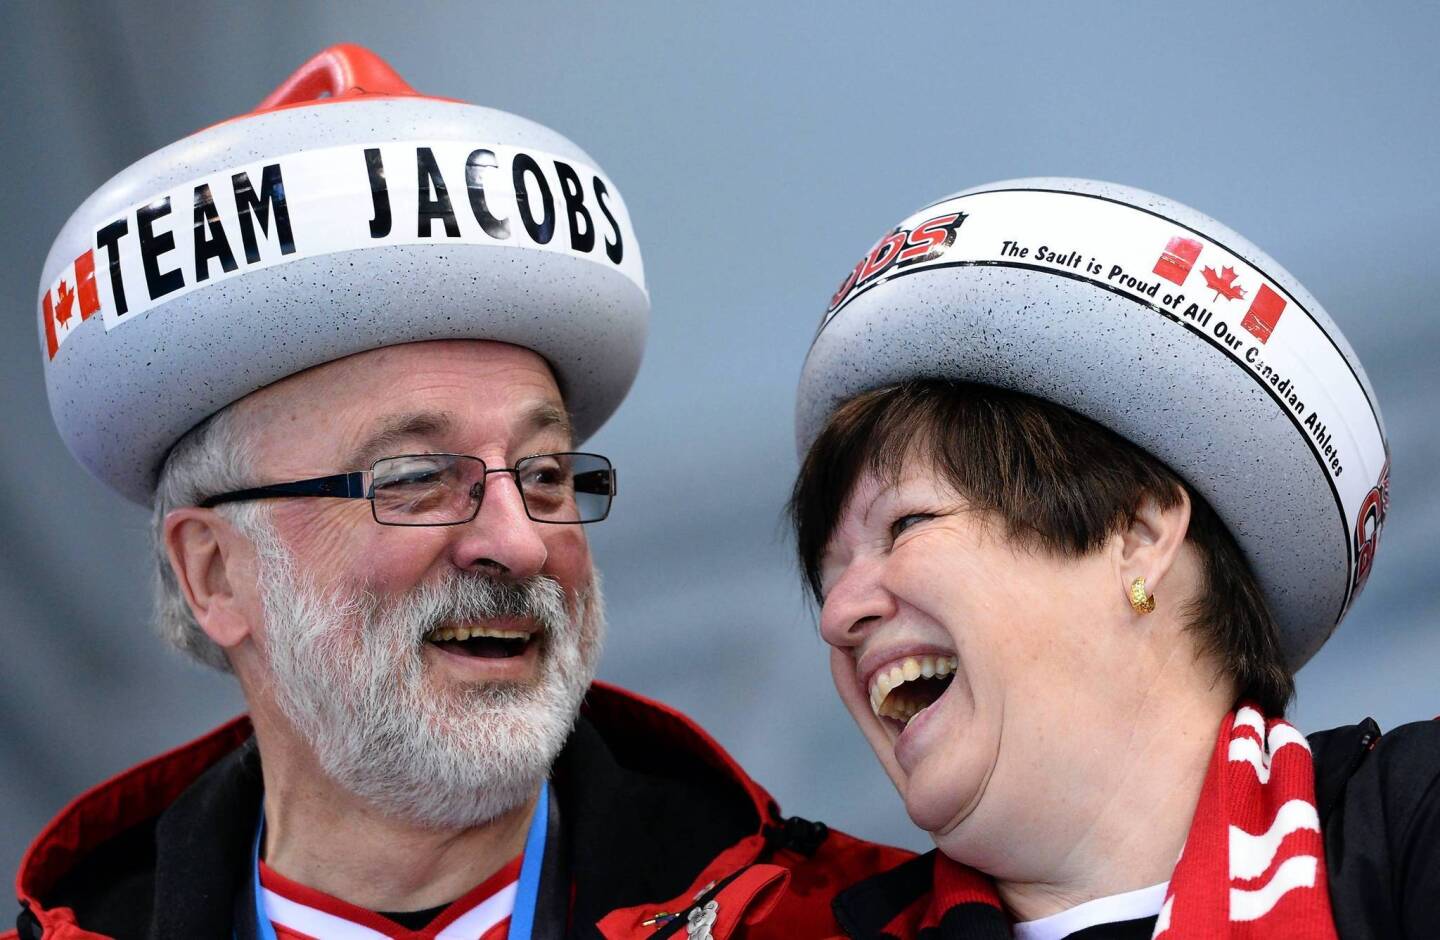 Canada's supporters cheer during the men's curling round robin session 10 at the Ice Cube Curling Center.